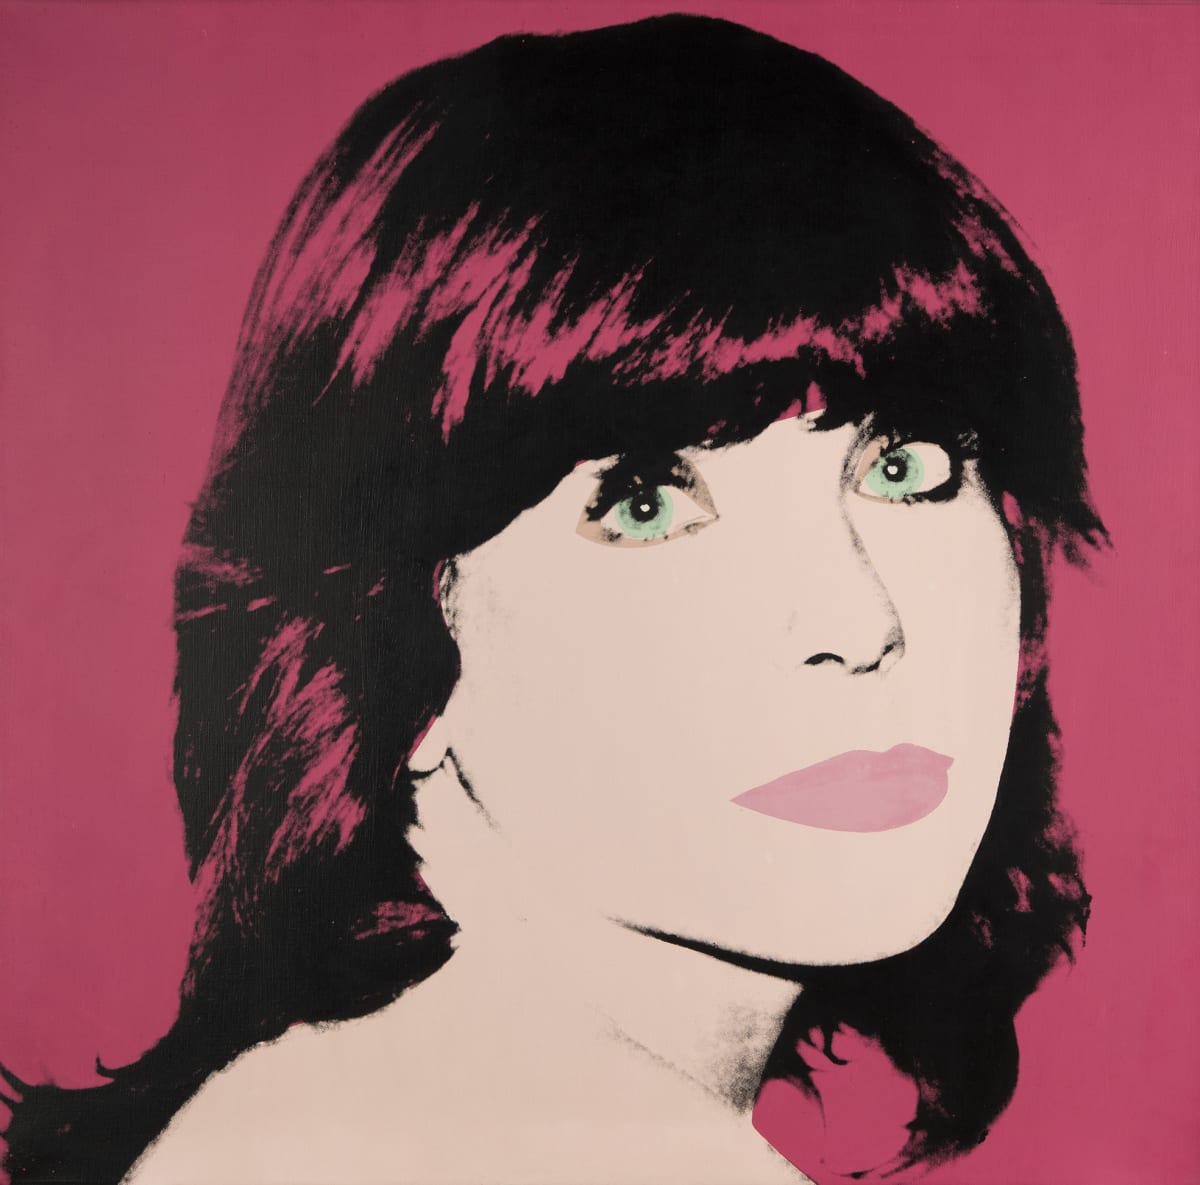 Screen print work by Andy Warhol from 1979 showing a woman's face against a pink background